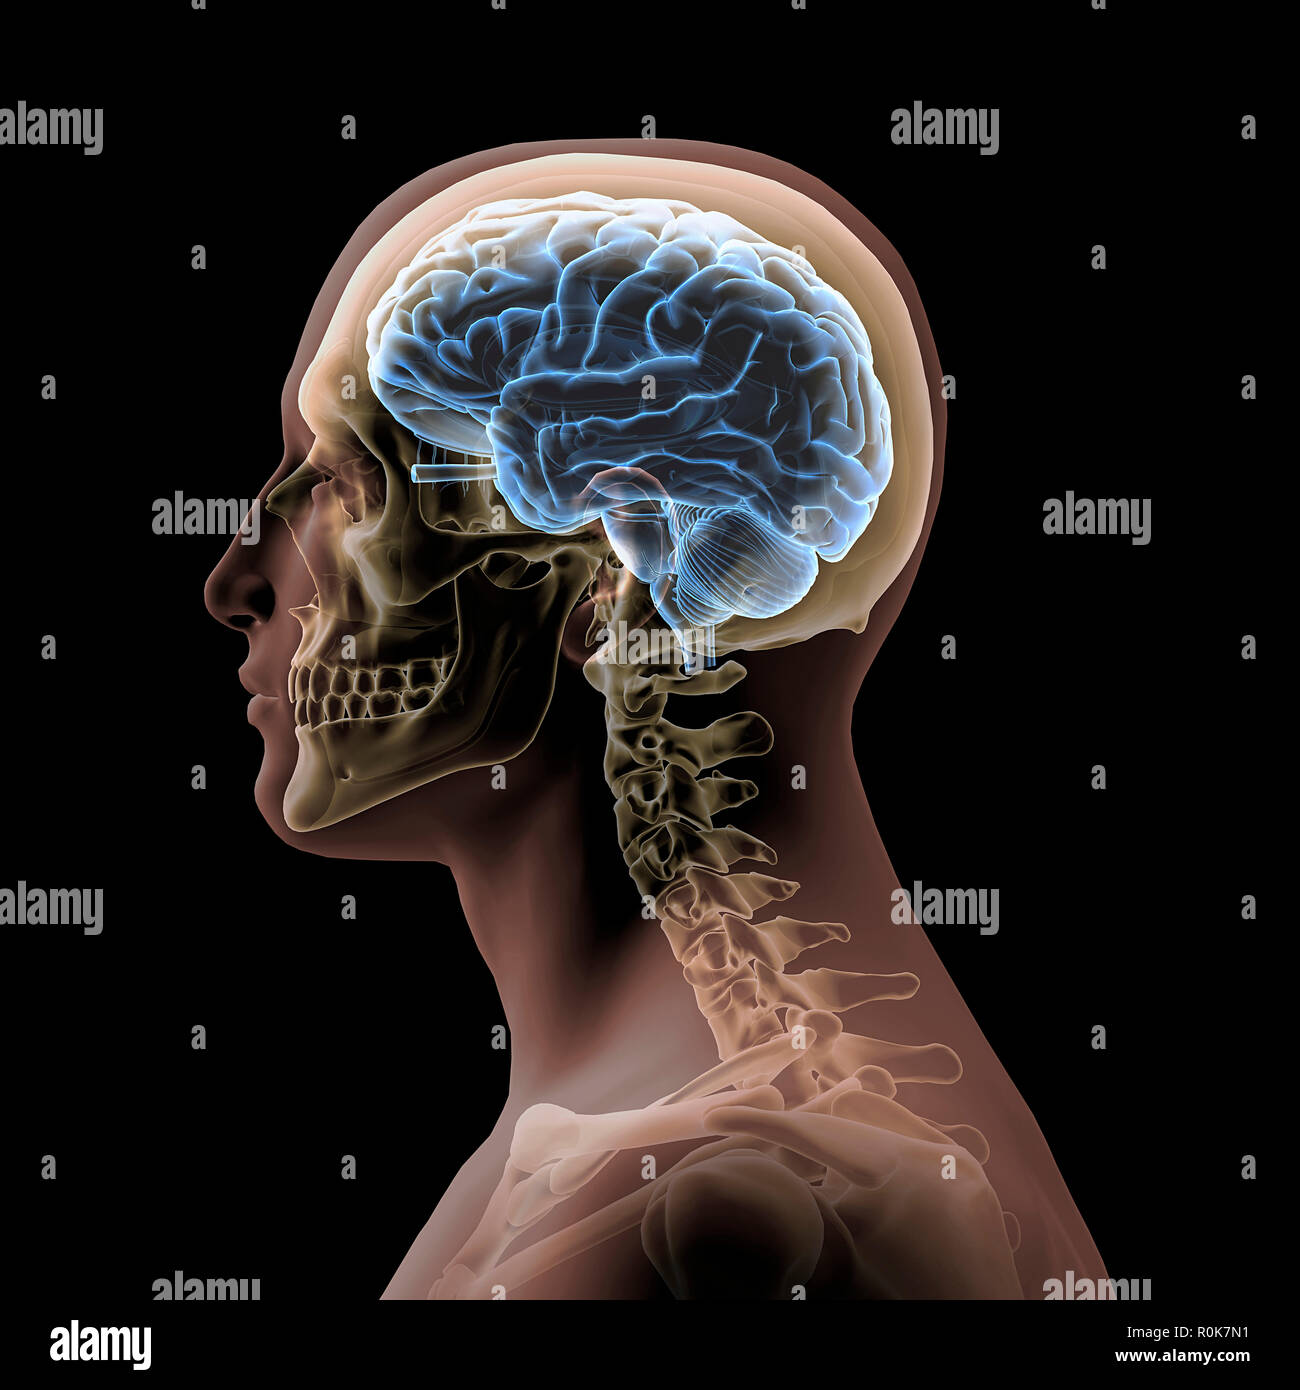 Profile of a man's head with skull and brain. Stock Photo